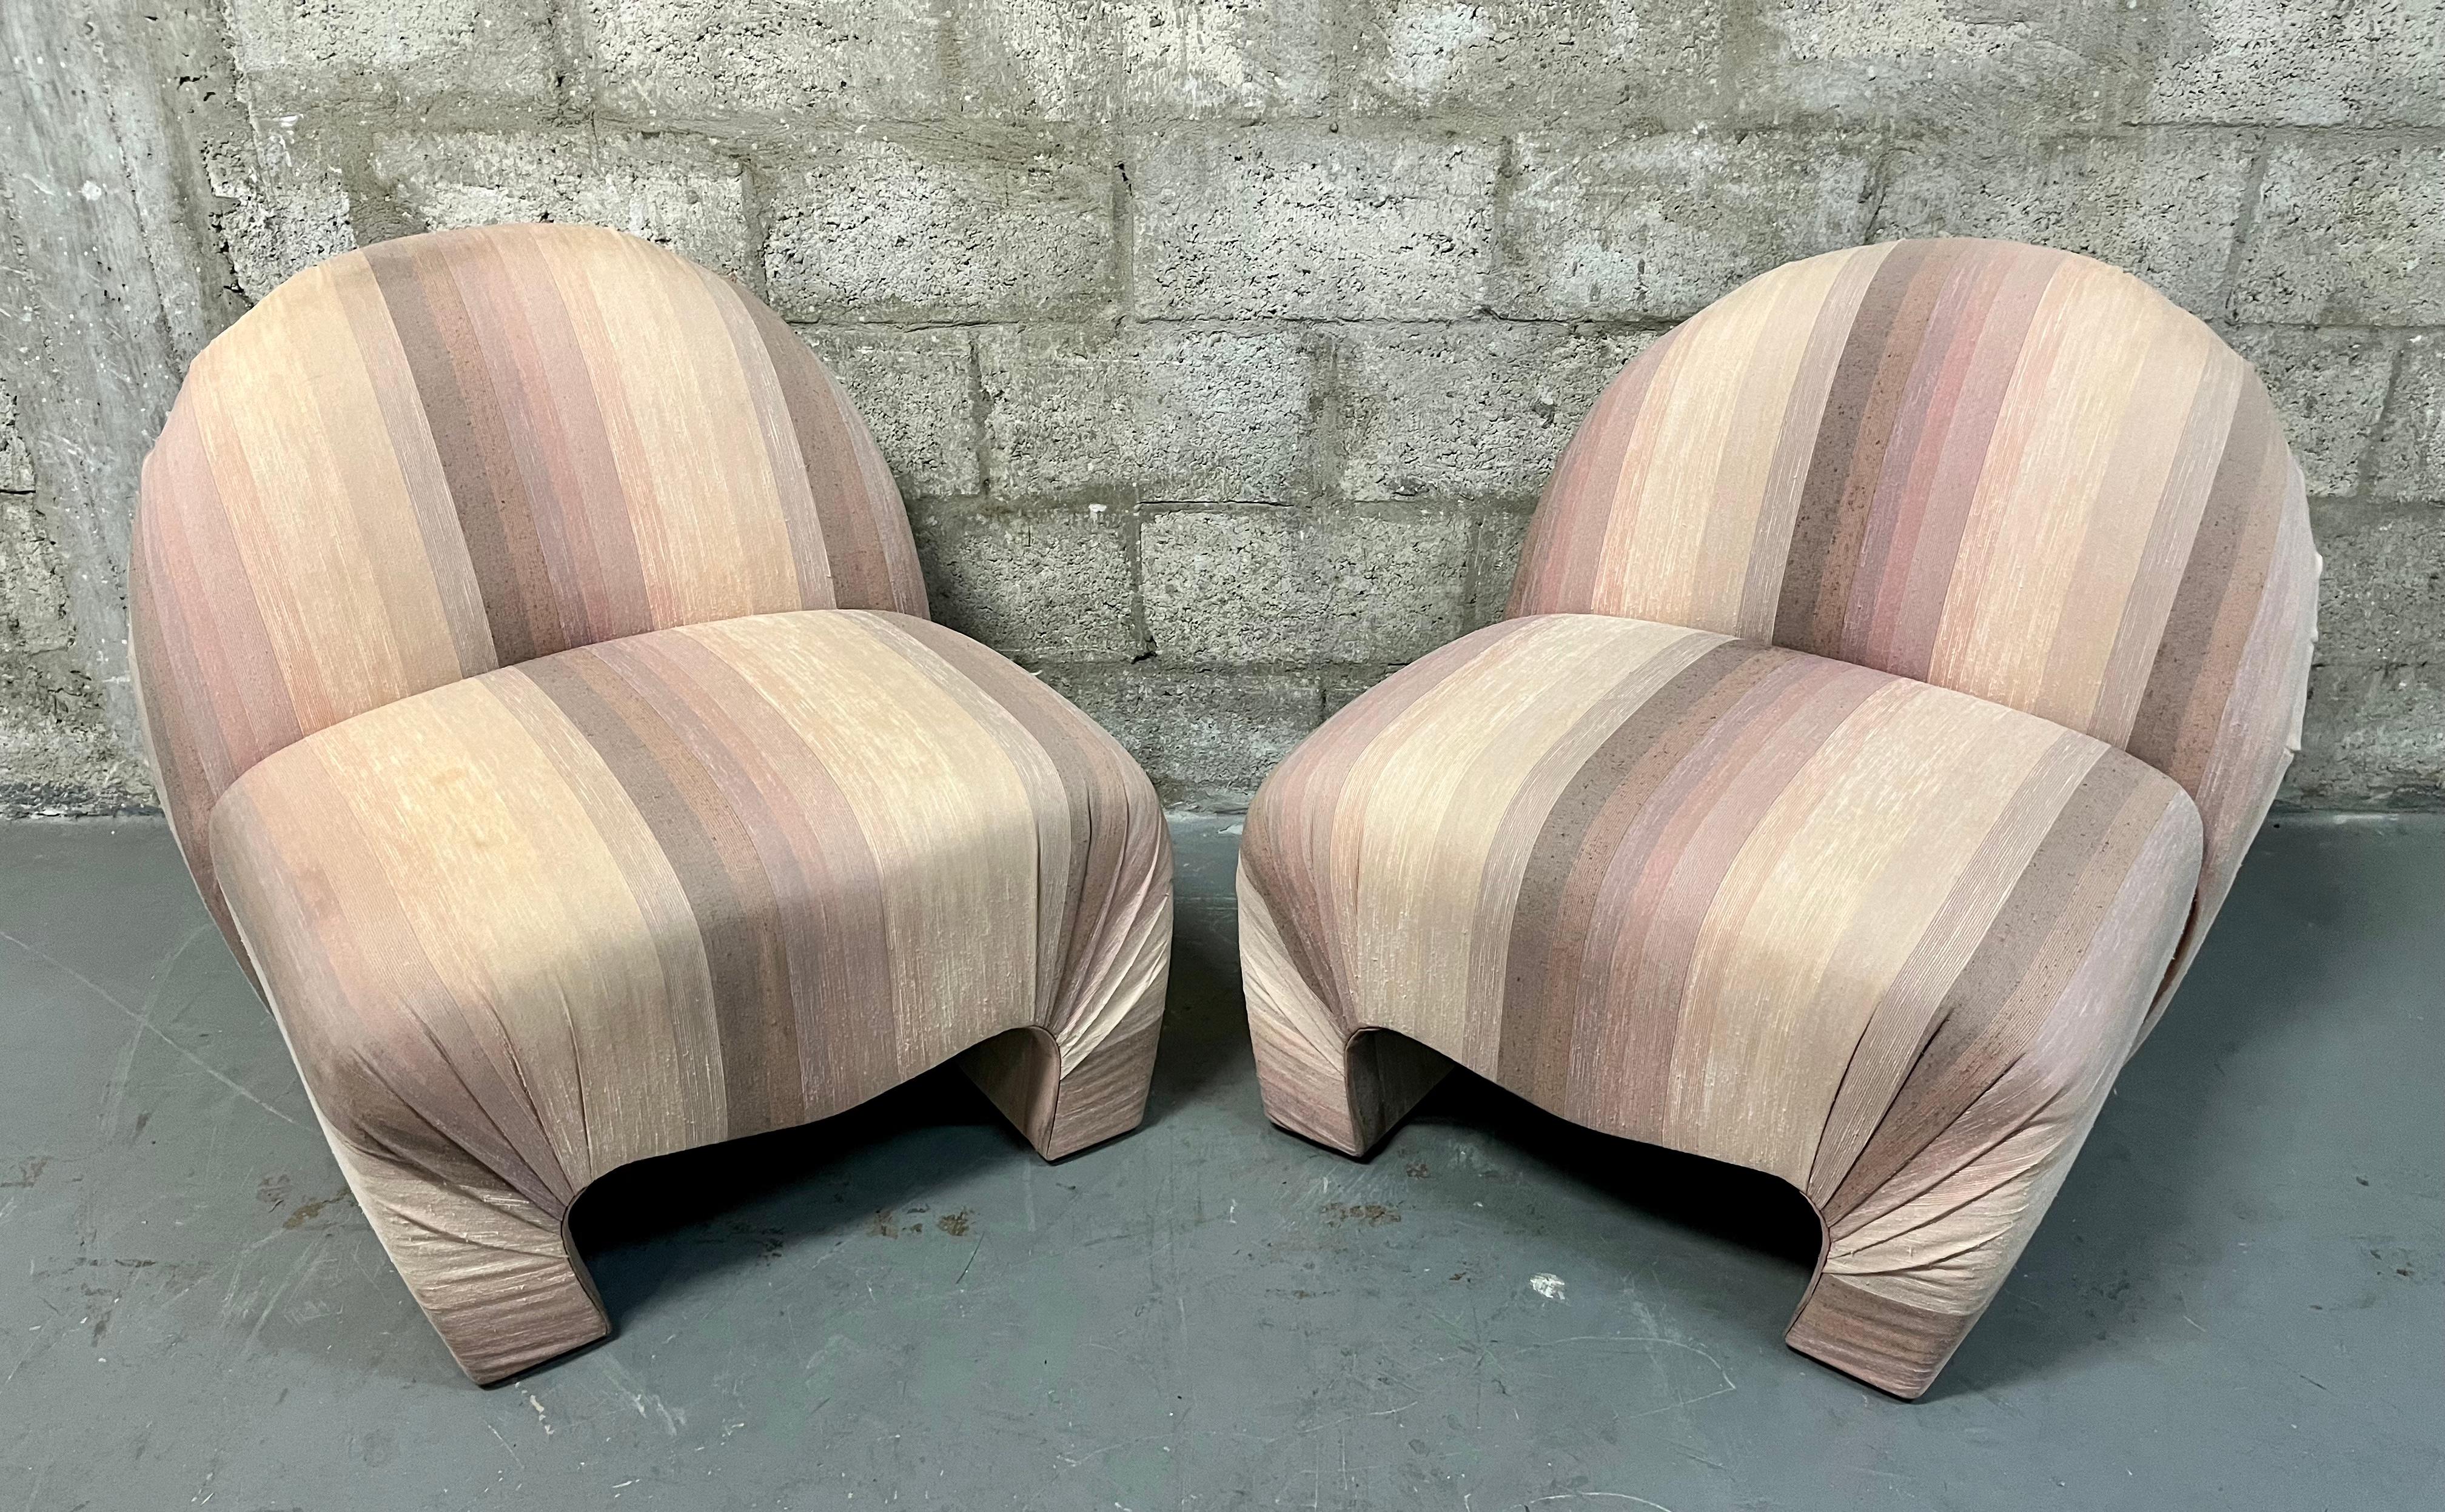 American A Pair of Lounge Chairs in the Vladimir Kagan for Weiman Style. Circa 1980s For Sale